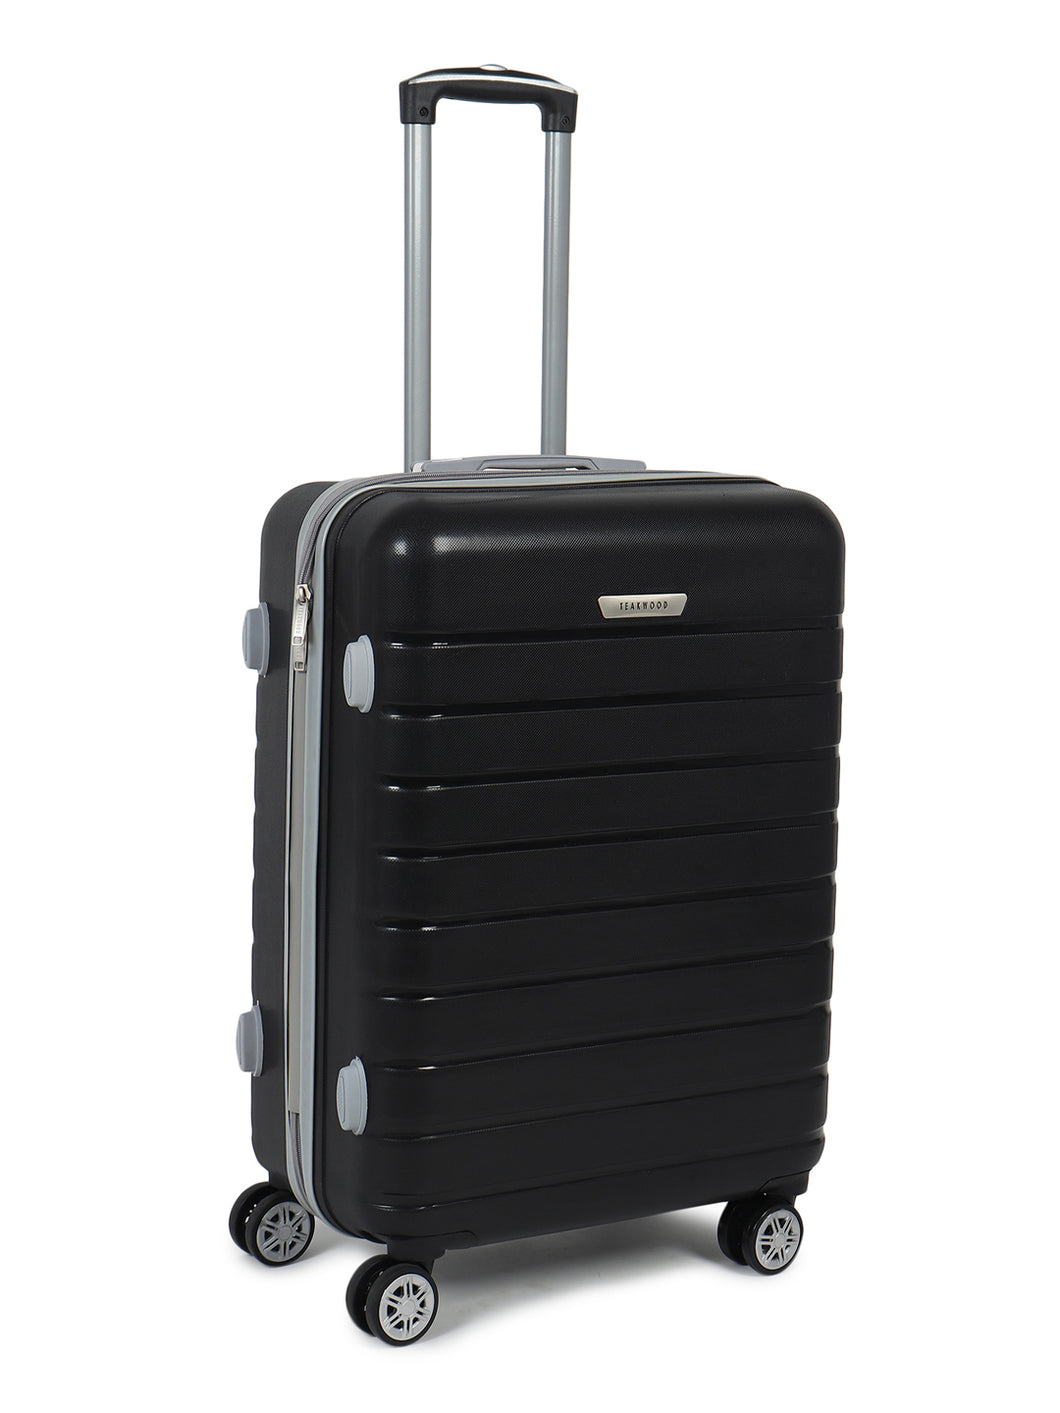 Unisex Black Textured Hard Sided Medium Size Check-In Trolley Bag